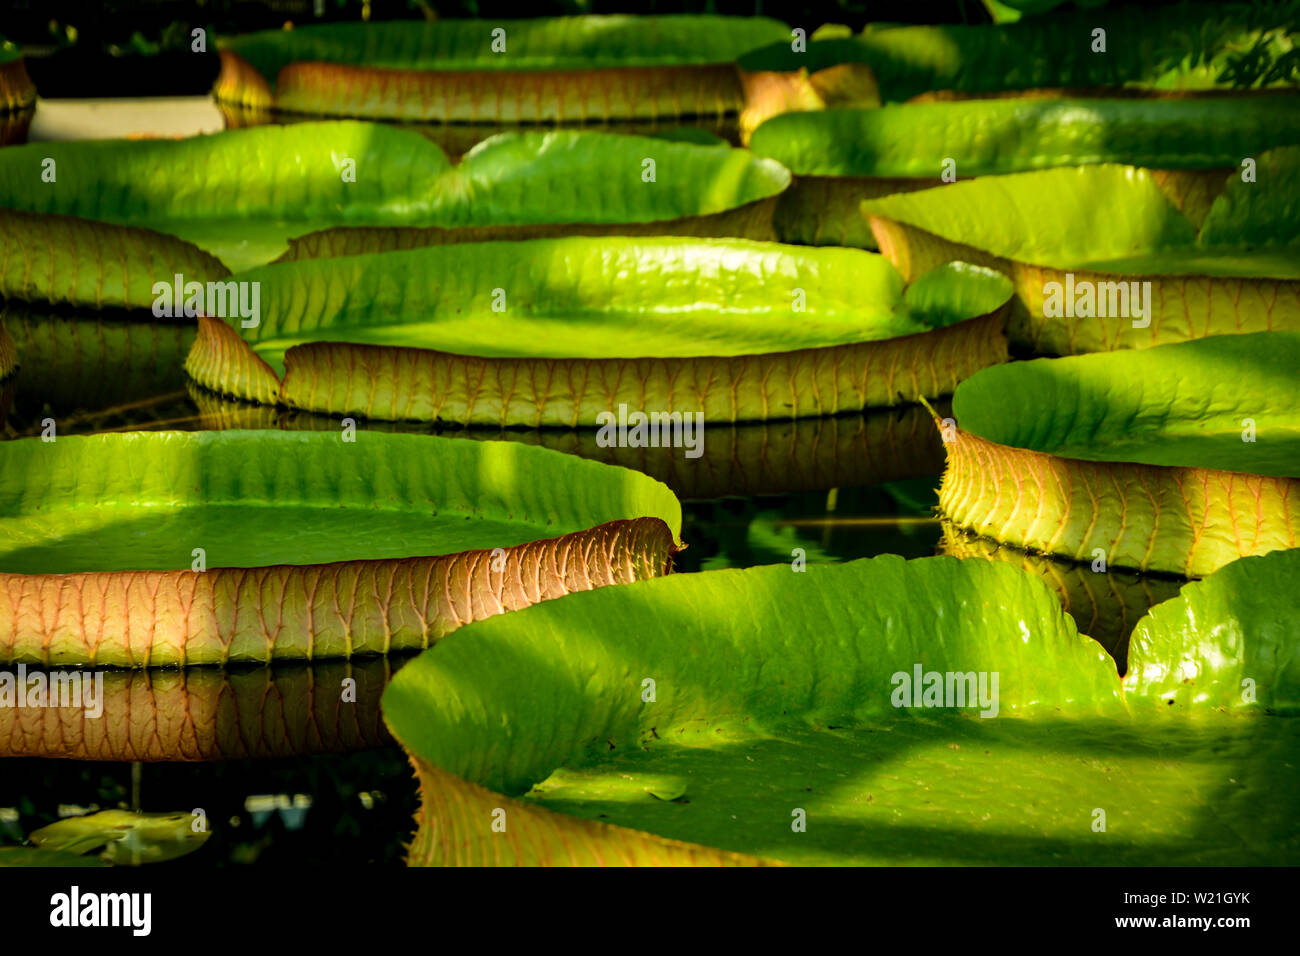 giant tropical water lily leaves swimming in pond Stock Photo